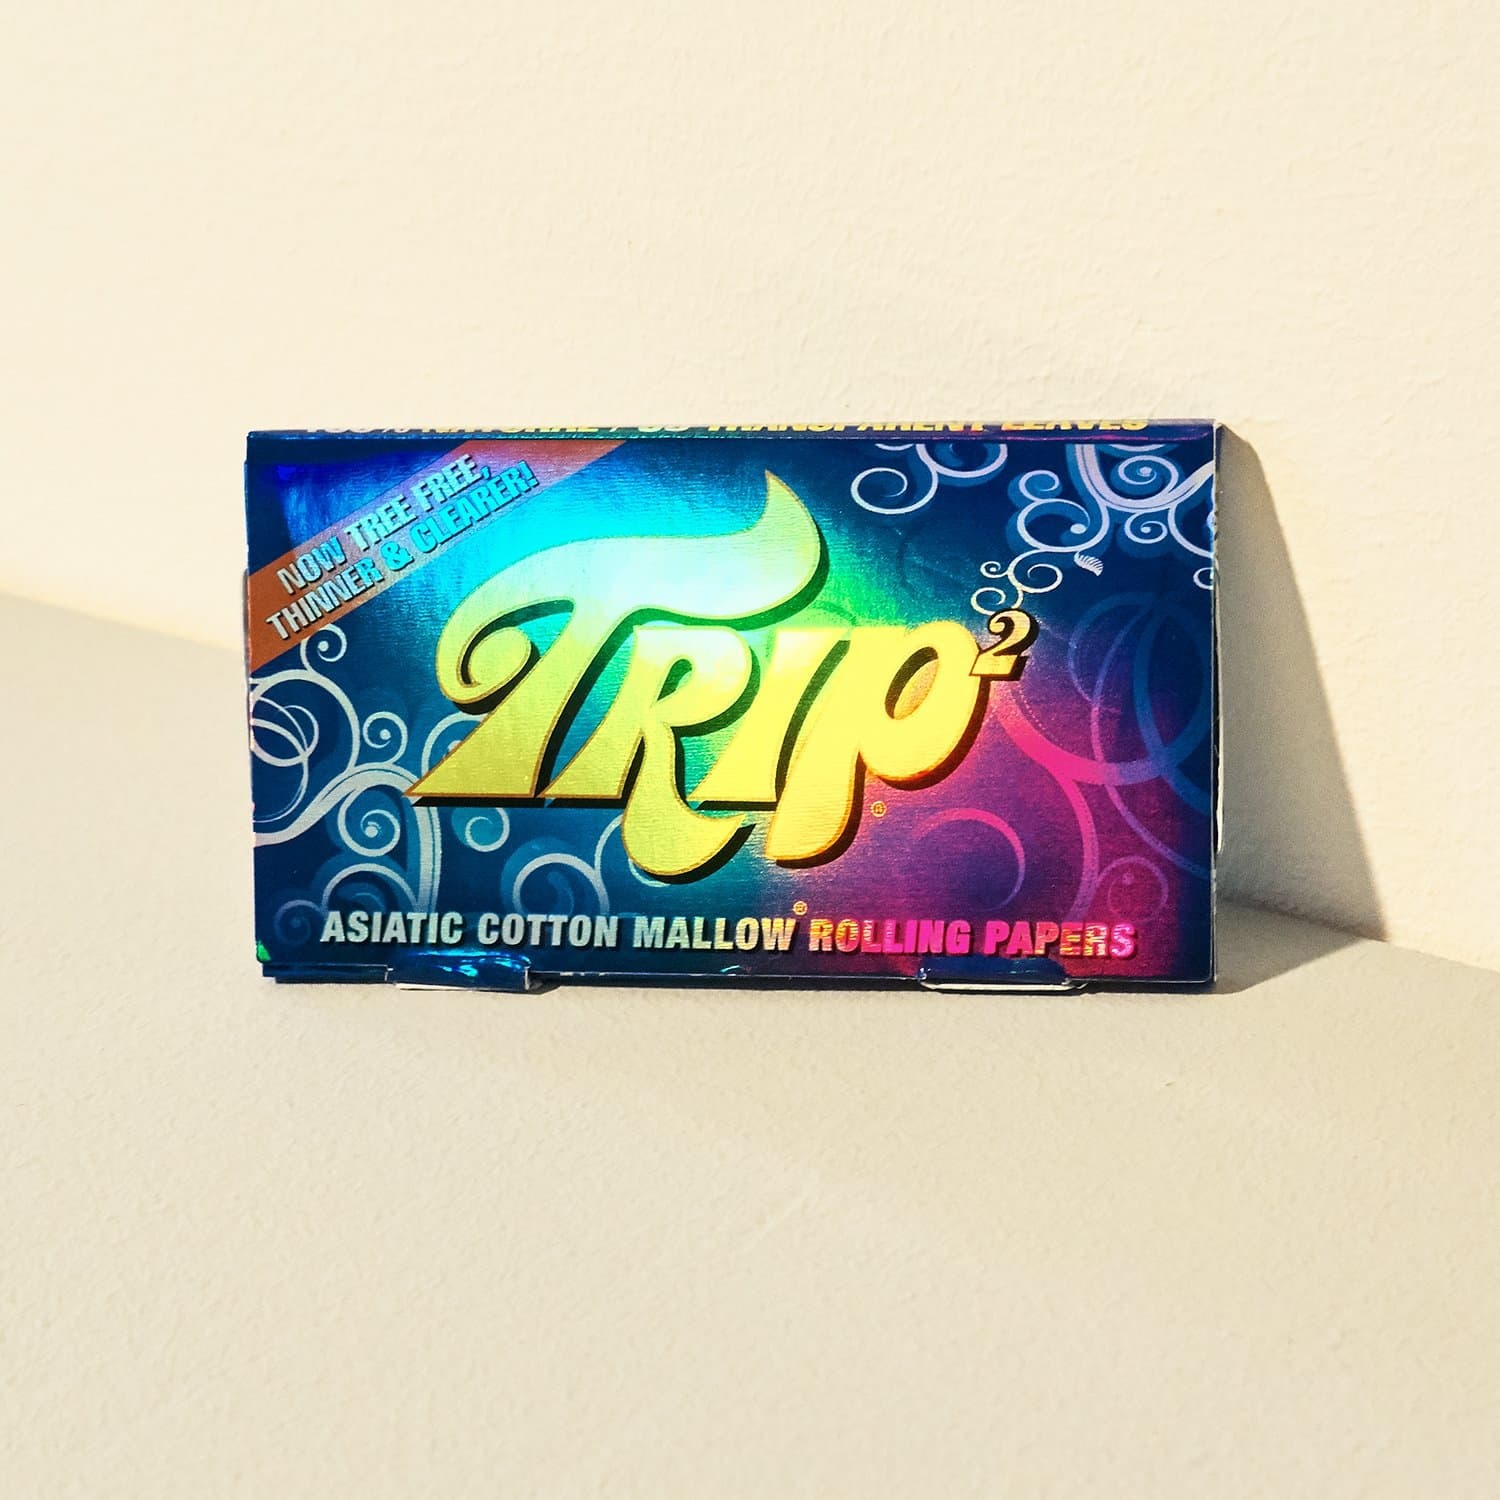 Asiatic Cotton Mallow Rolling Papers